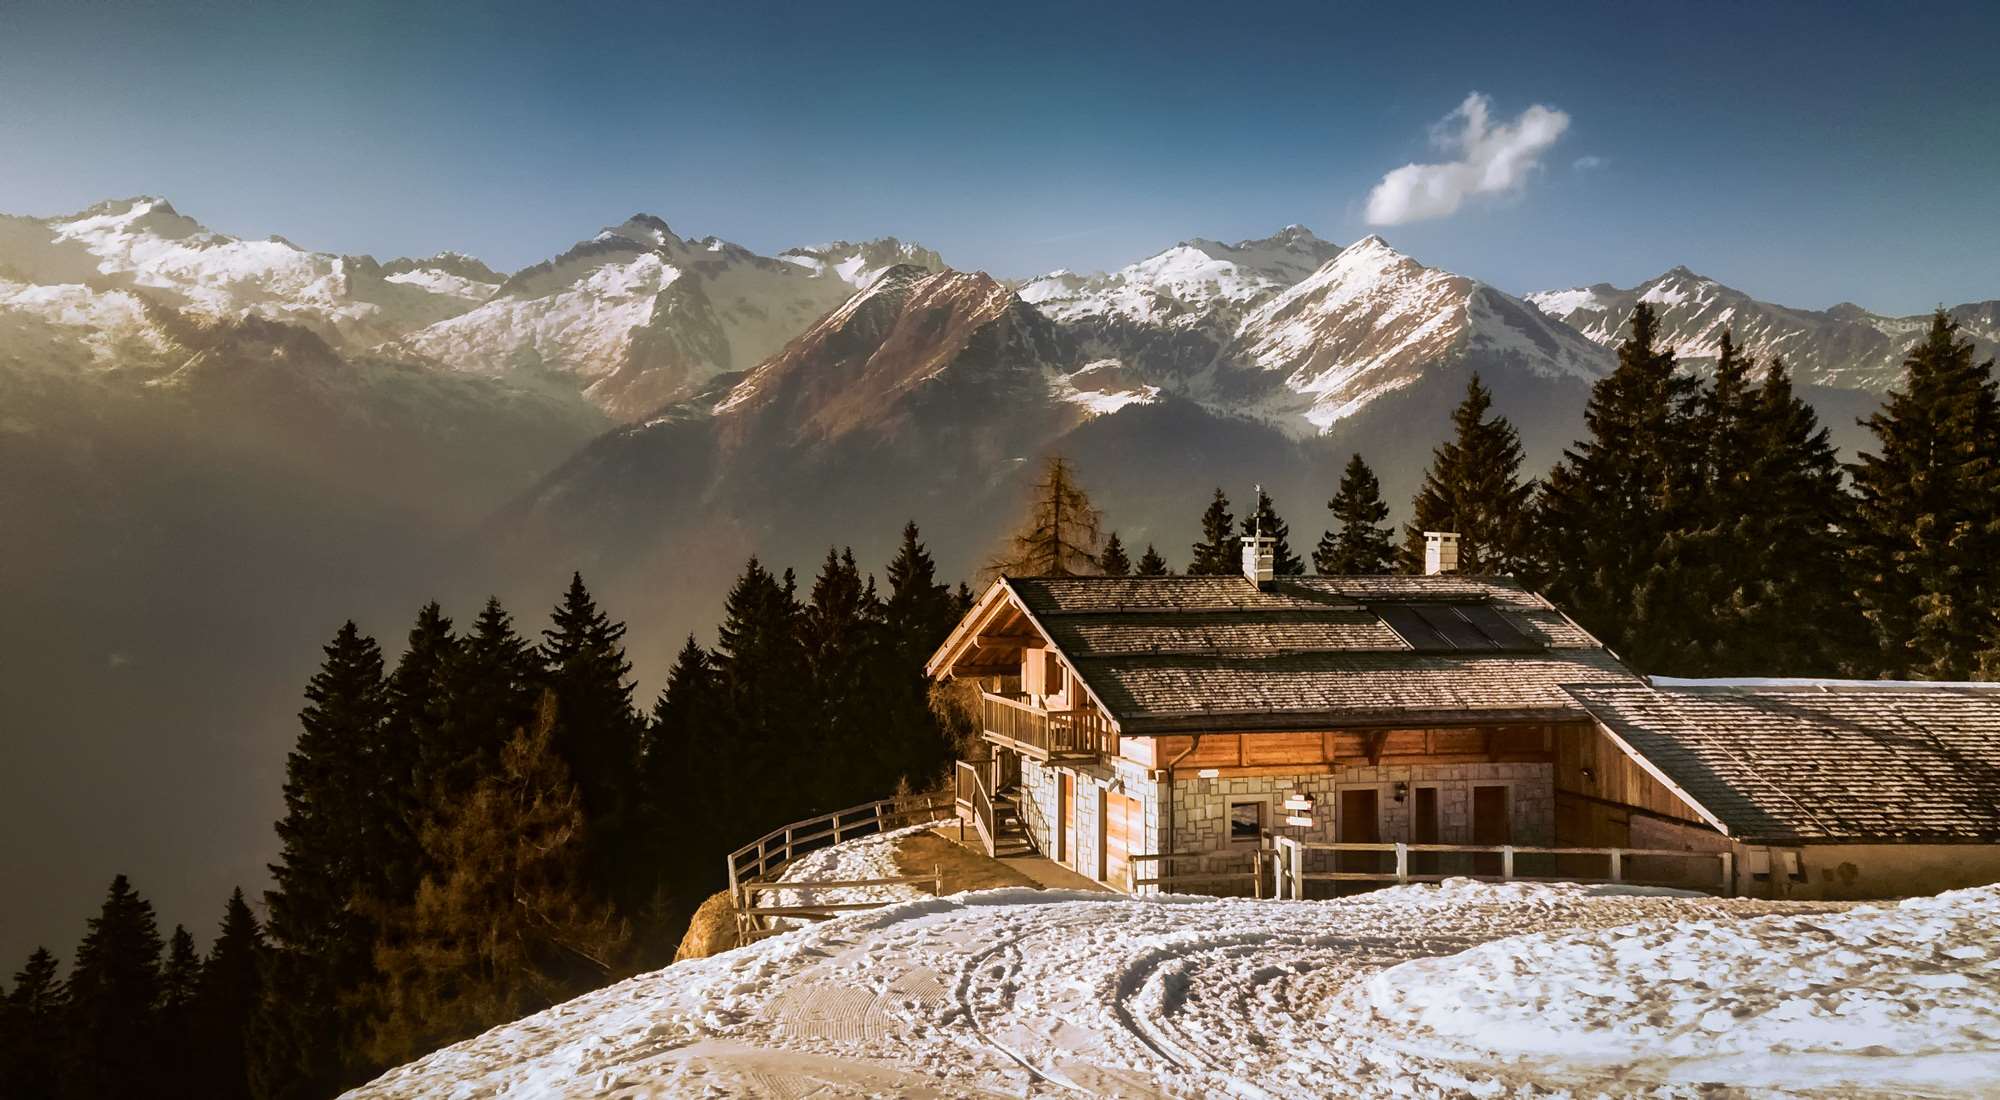 alps, country, countryside, forest, home, house, italy